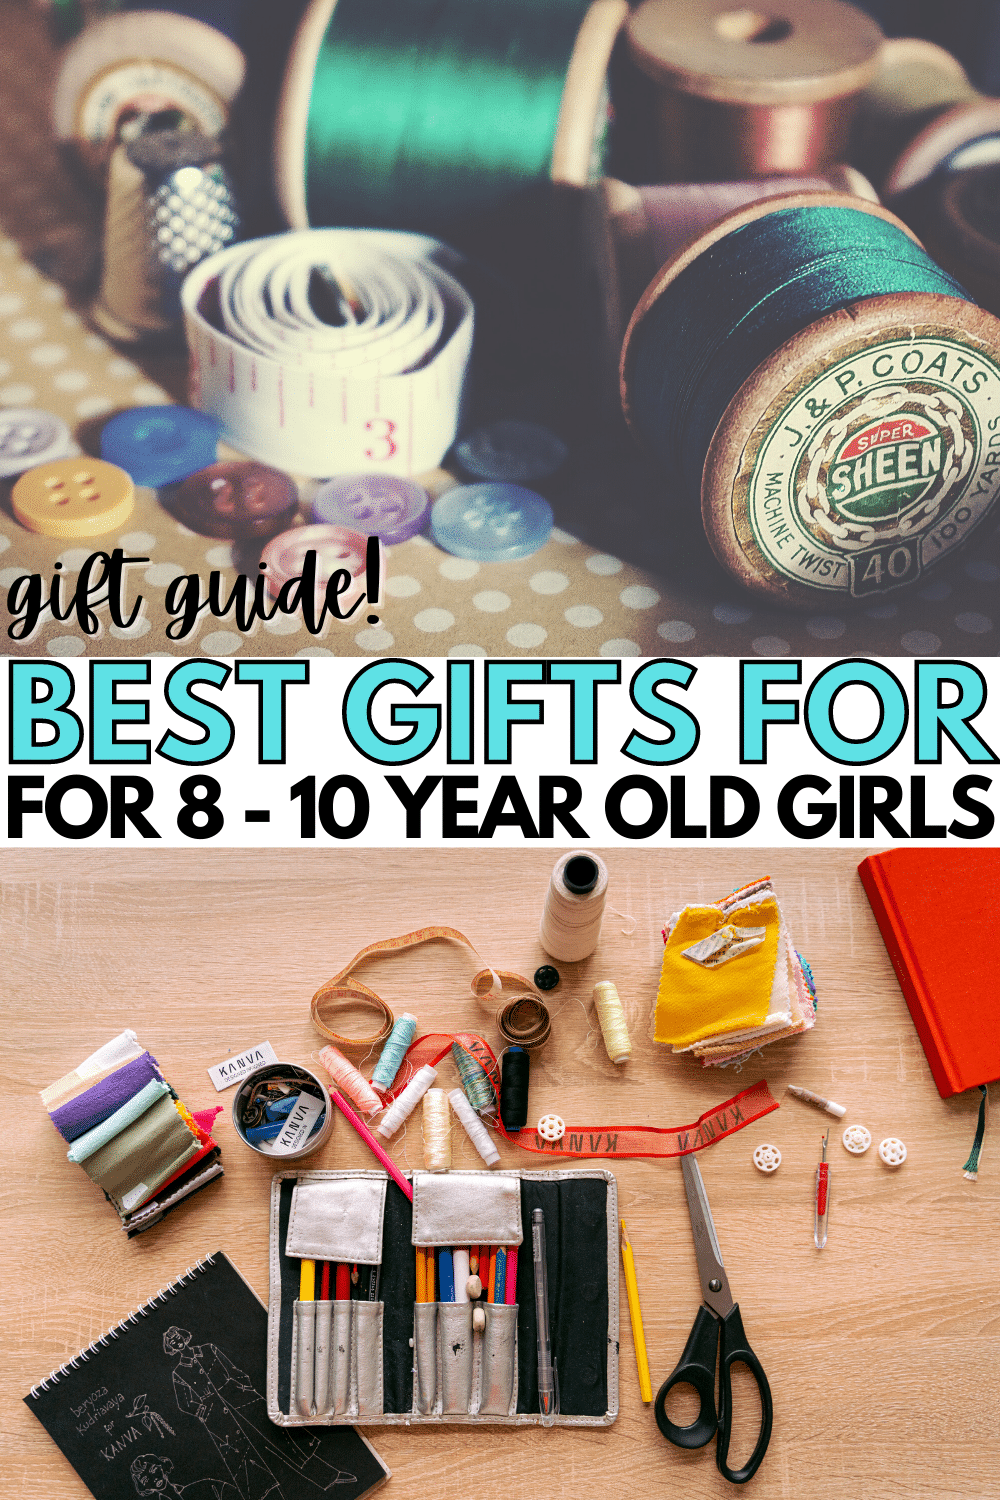 Here's a list of the best gifts for 8-10 year old girls to help anyone who is at a loss as to what girls in this age range like. #giftguide #giftideas #forher #giftsforgirls via @wondermomwannab